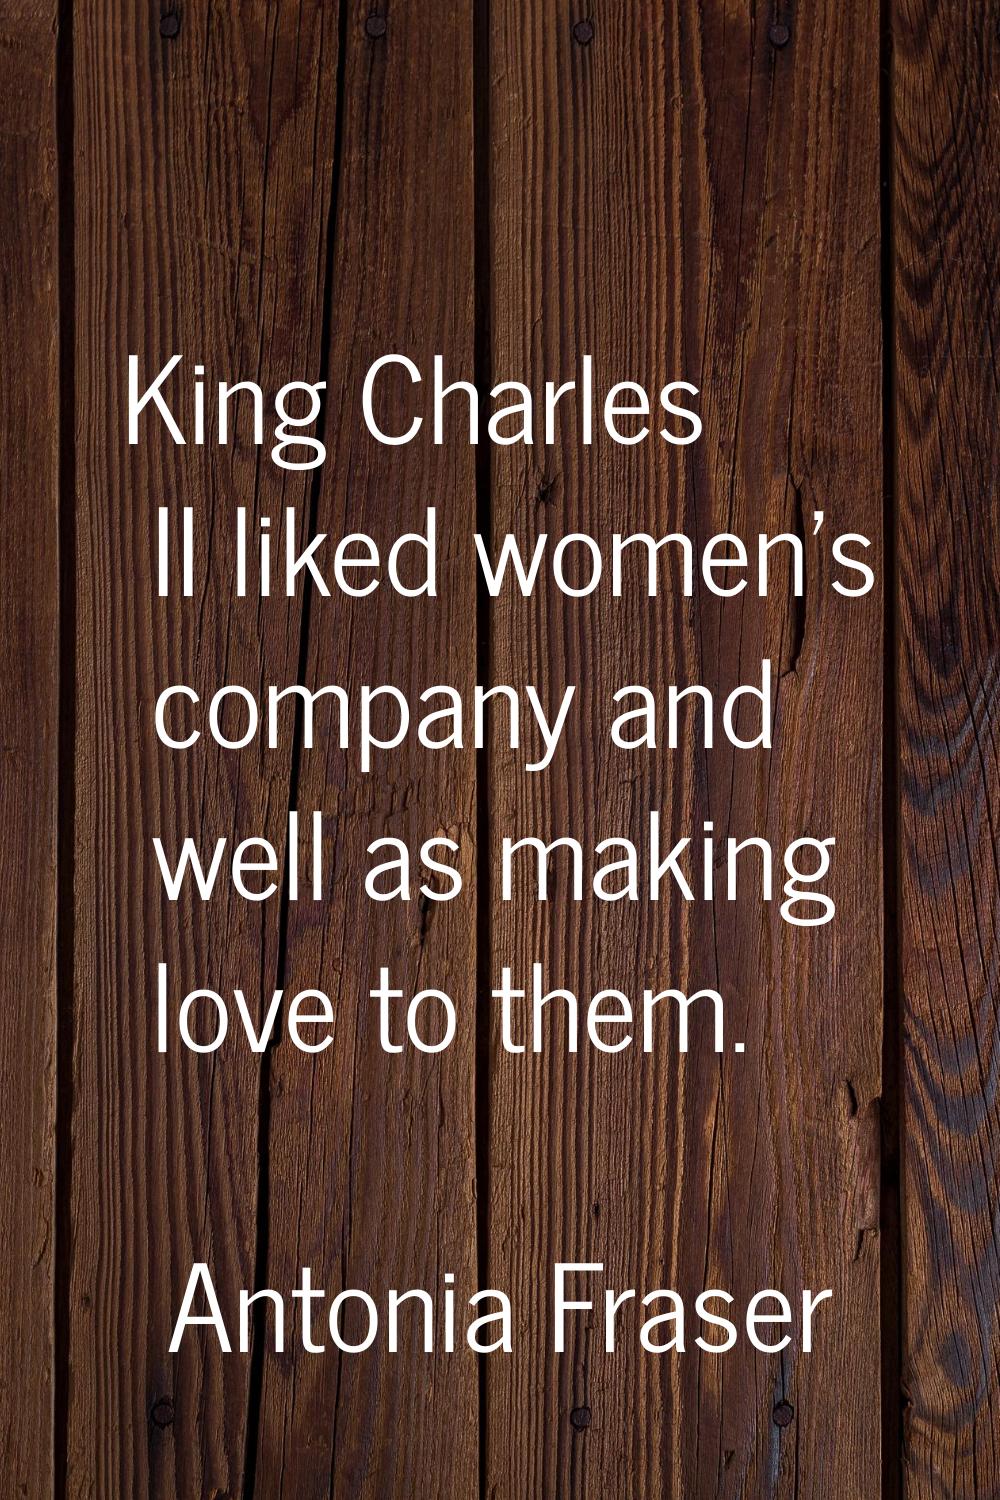 King Charles II liked women's company and well as making love to them.